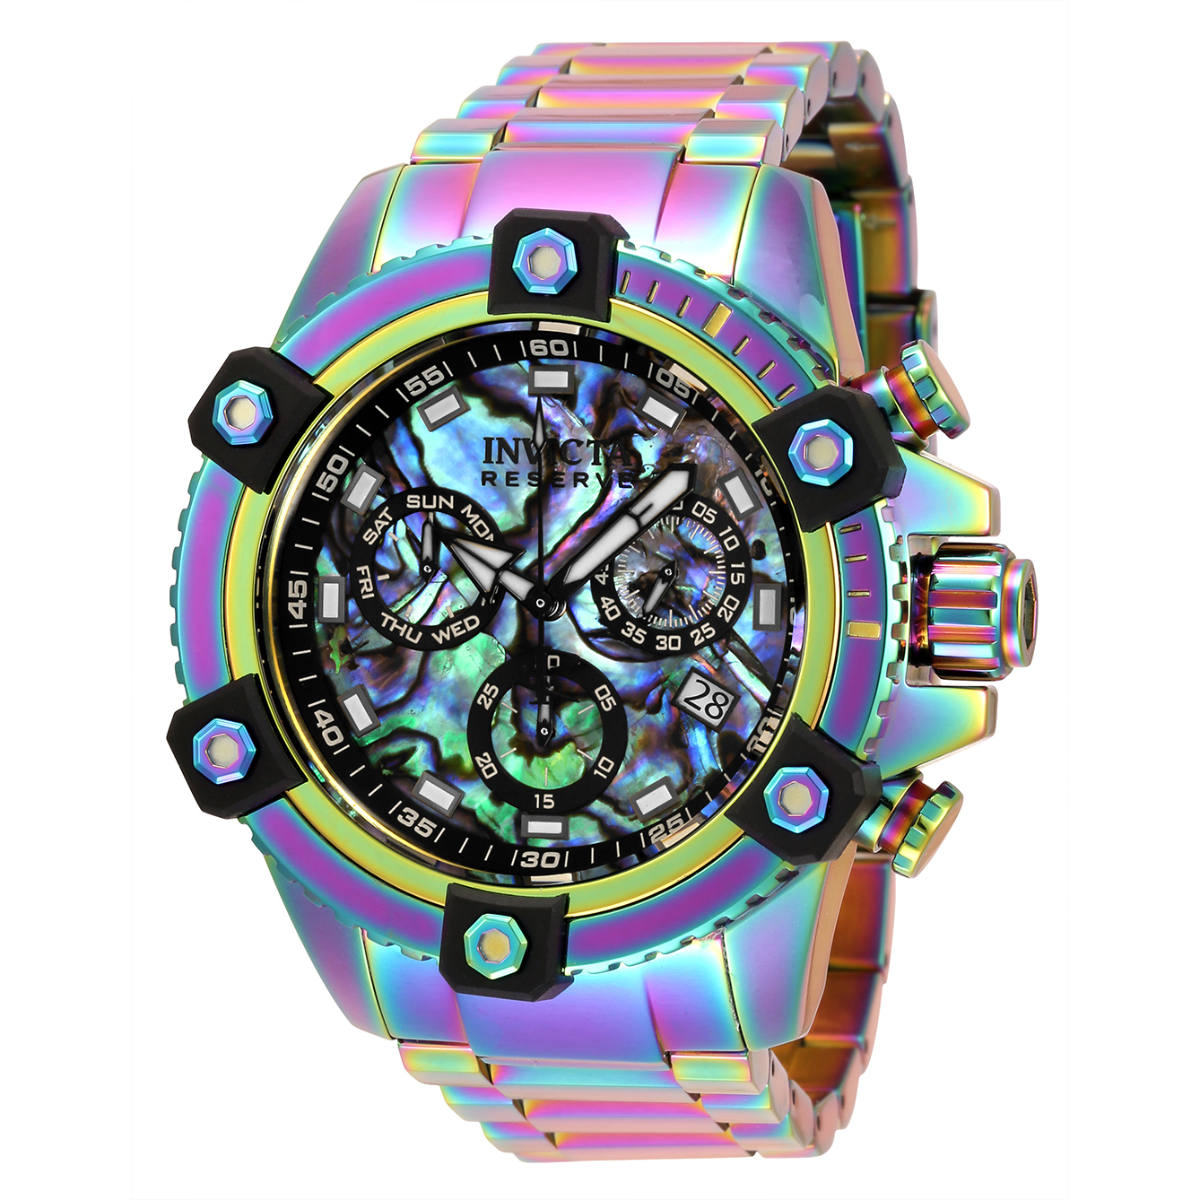 Pre-Owned Invicta Reserve Men%27s Watch w/Abalone Dial - 48mm, Iridescent (AIC-35555)